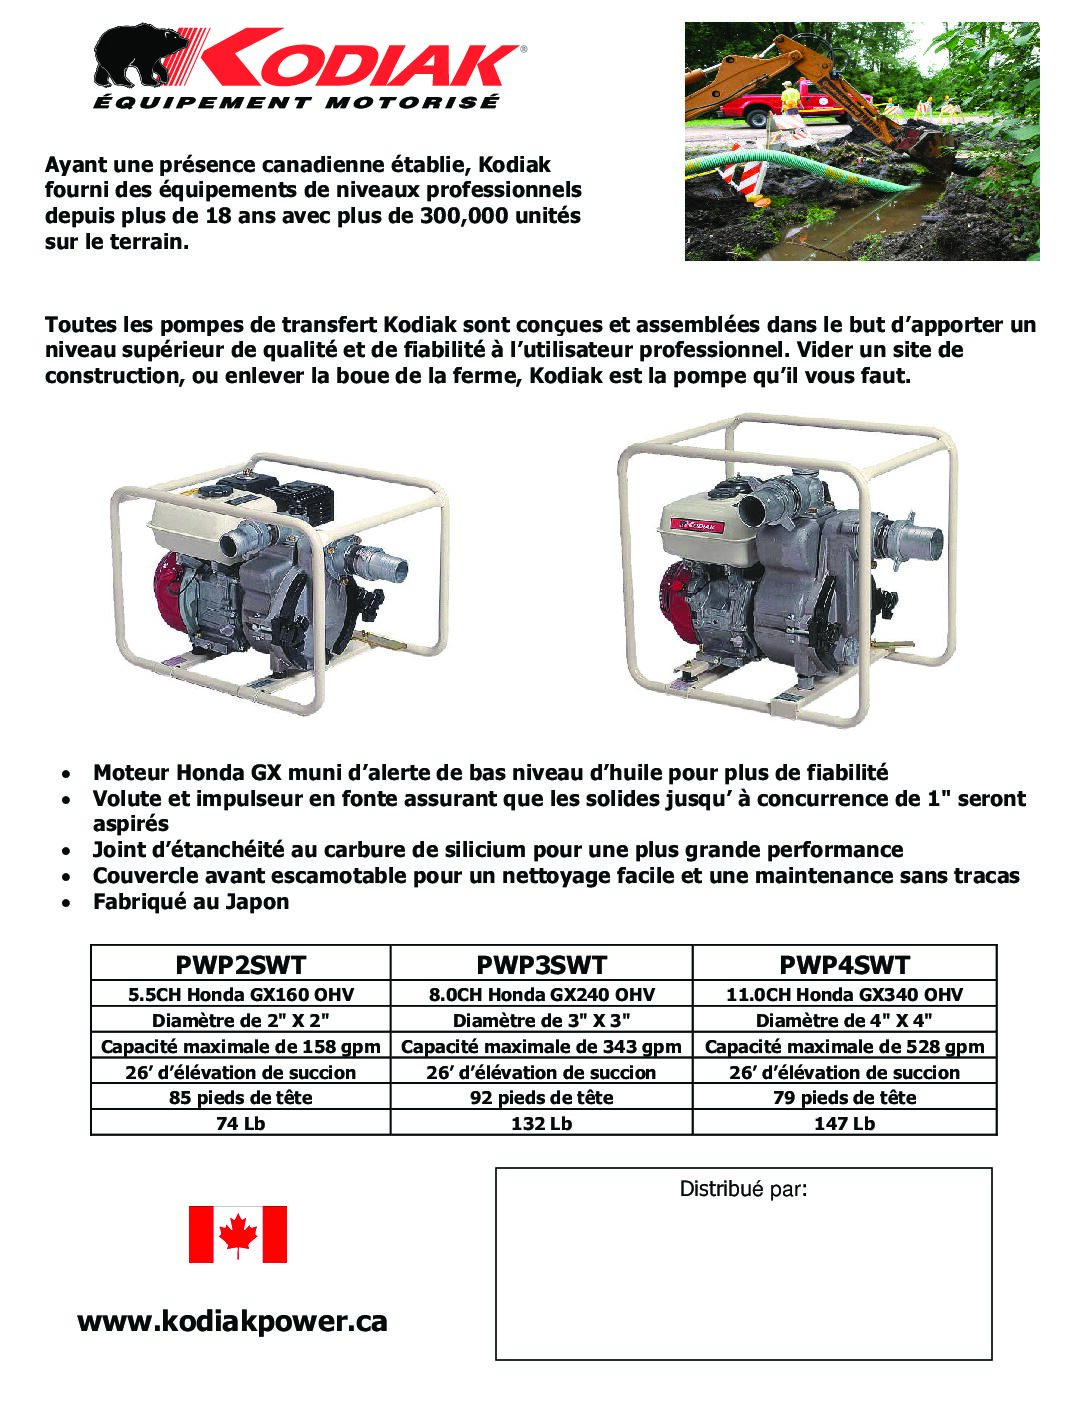 PWP2SWT French Brochure